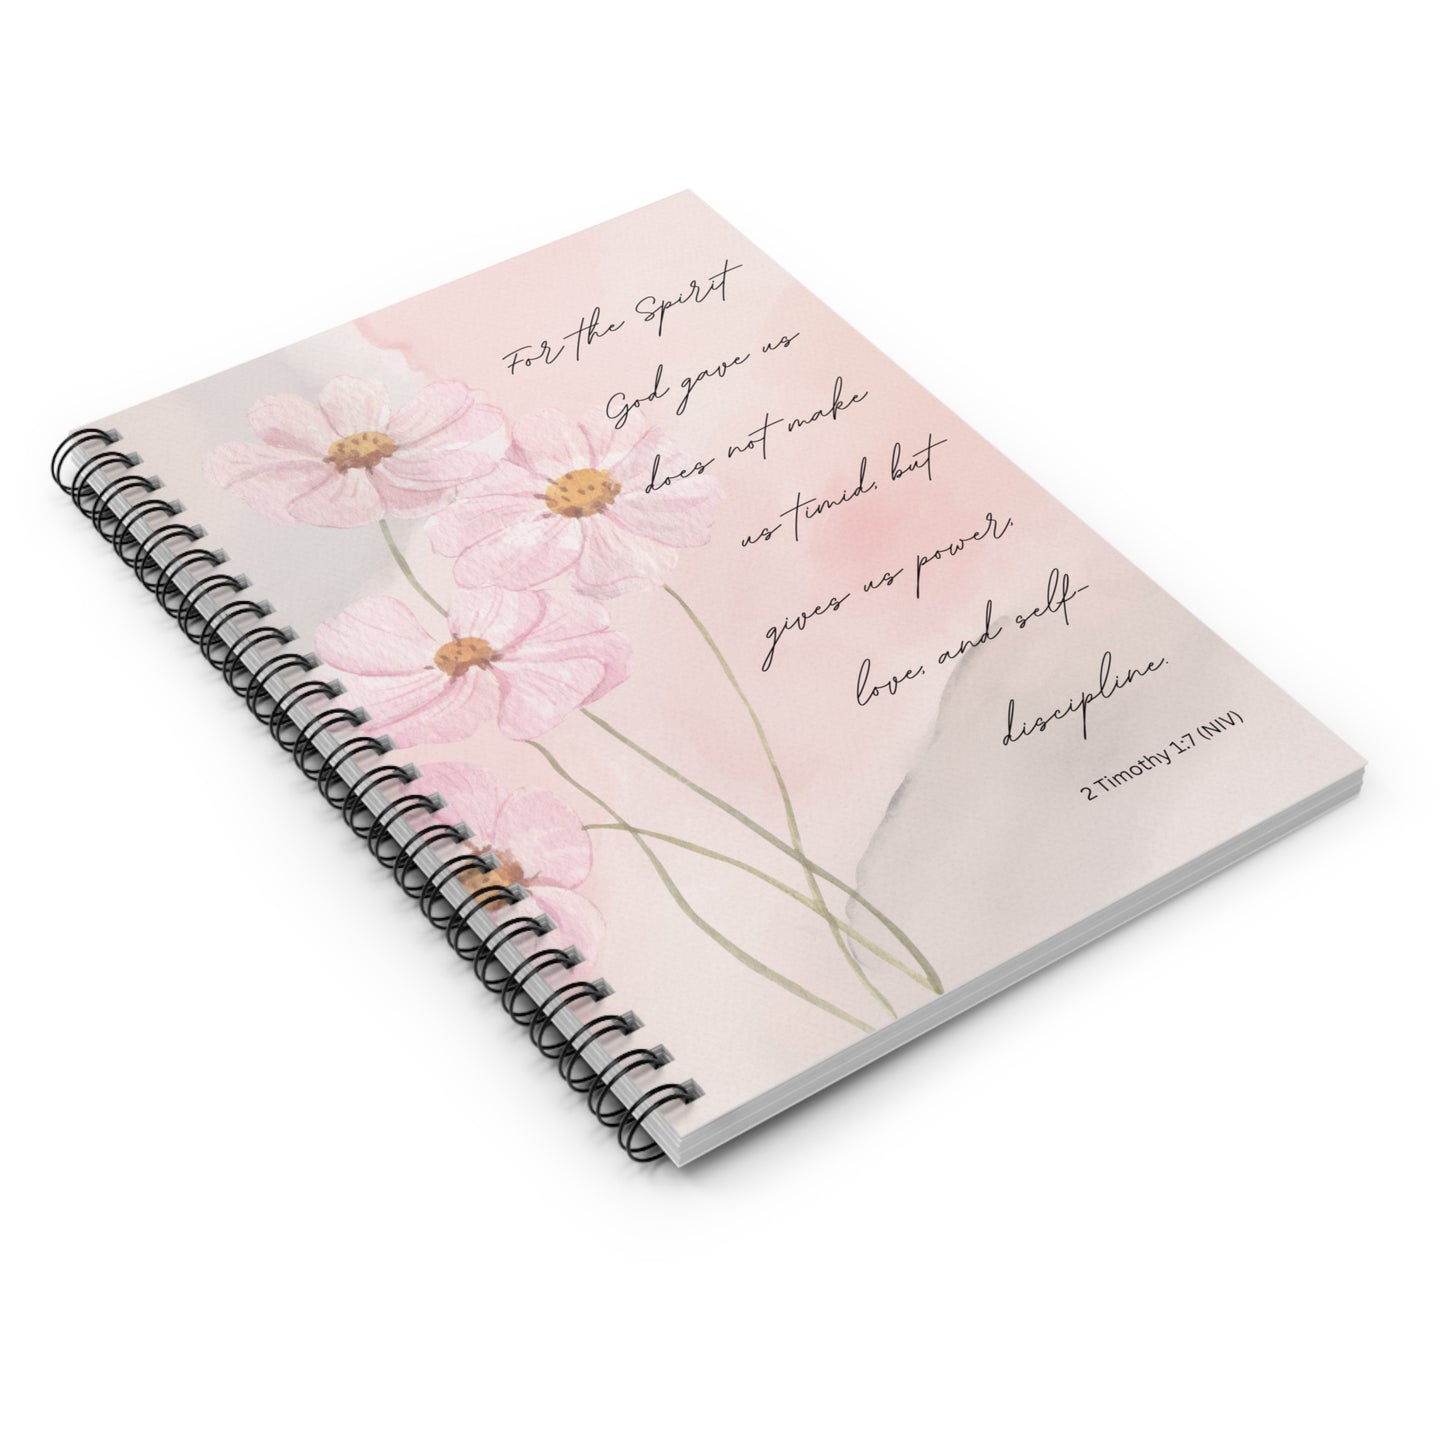 Empowerment Reflections Journal – Rooted in 1 Timothy 1:7, this journal invites independent exploration. Unleash the power, love, and self-discipline within as you embark on a personal journey of self-discovery. Your space for empowerment, resilience, and embracing the strength within. #ReflectionsJournal #EmpowermentJourney #InnerStrength